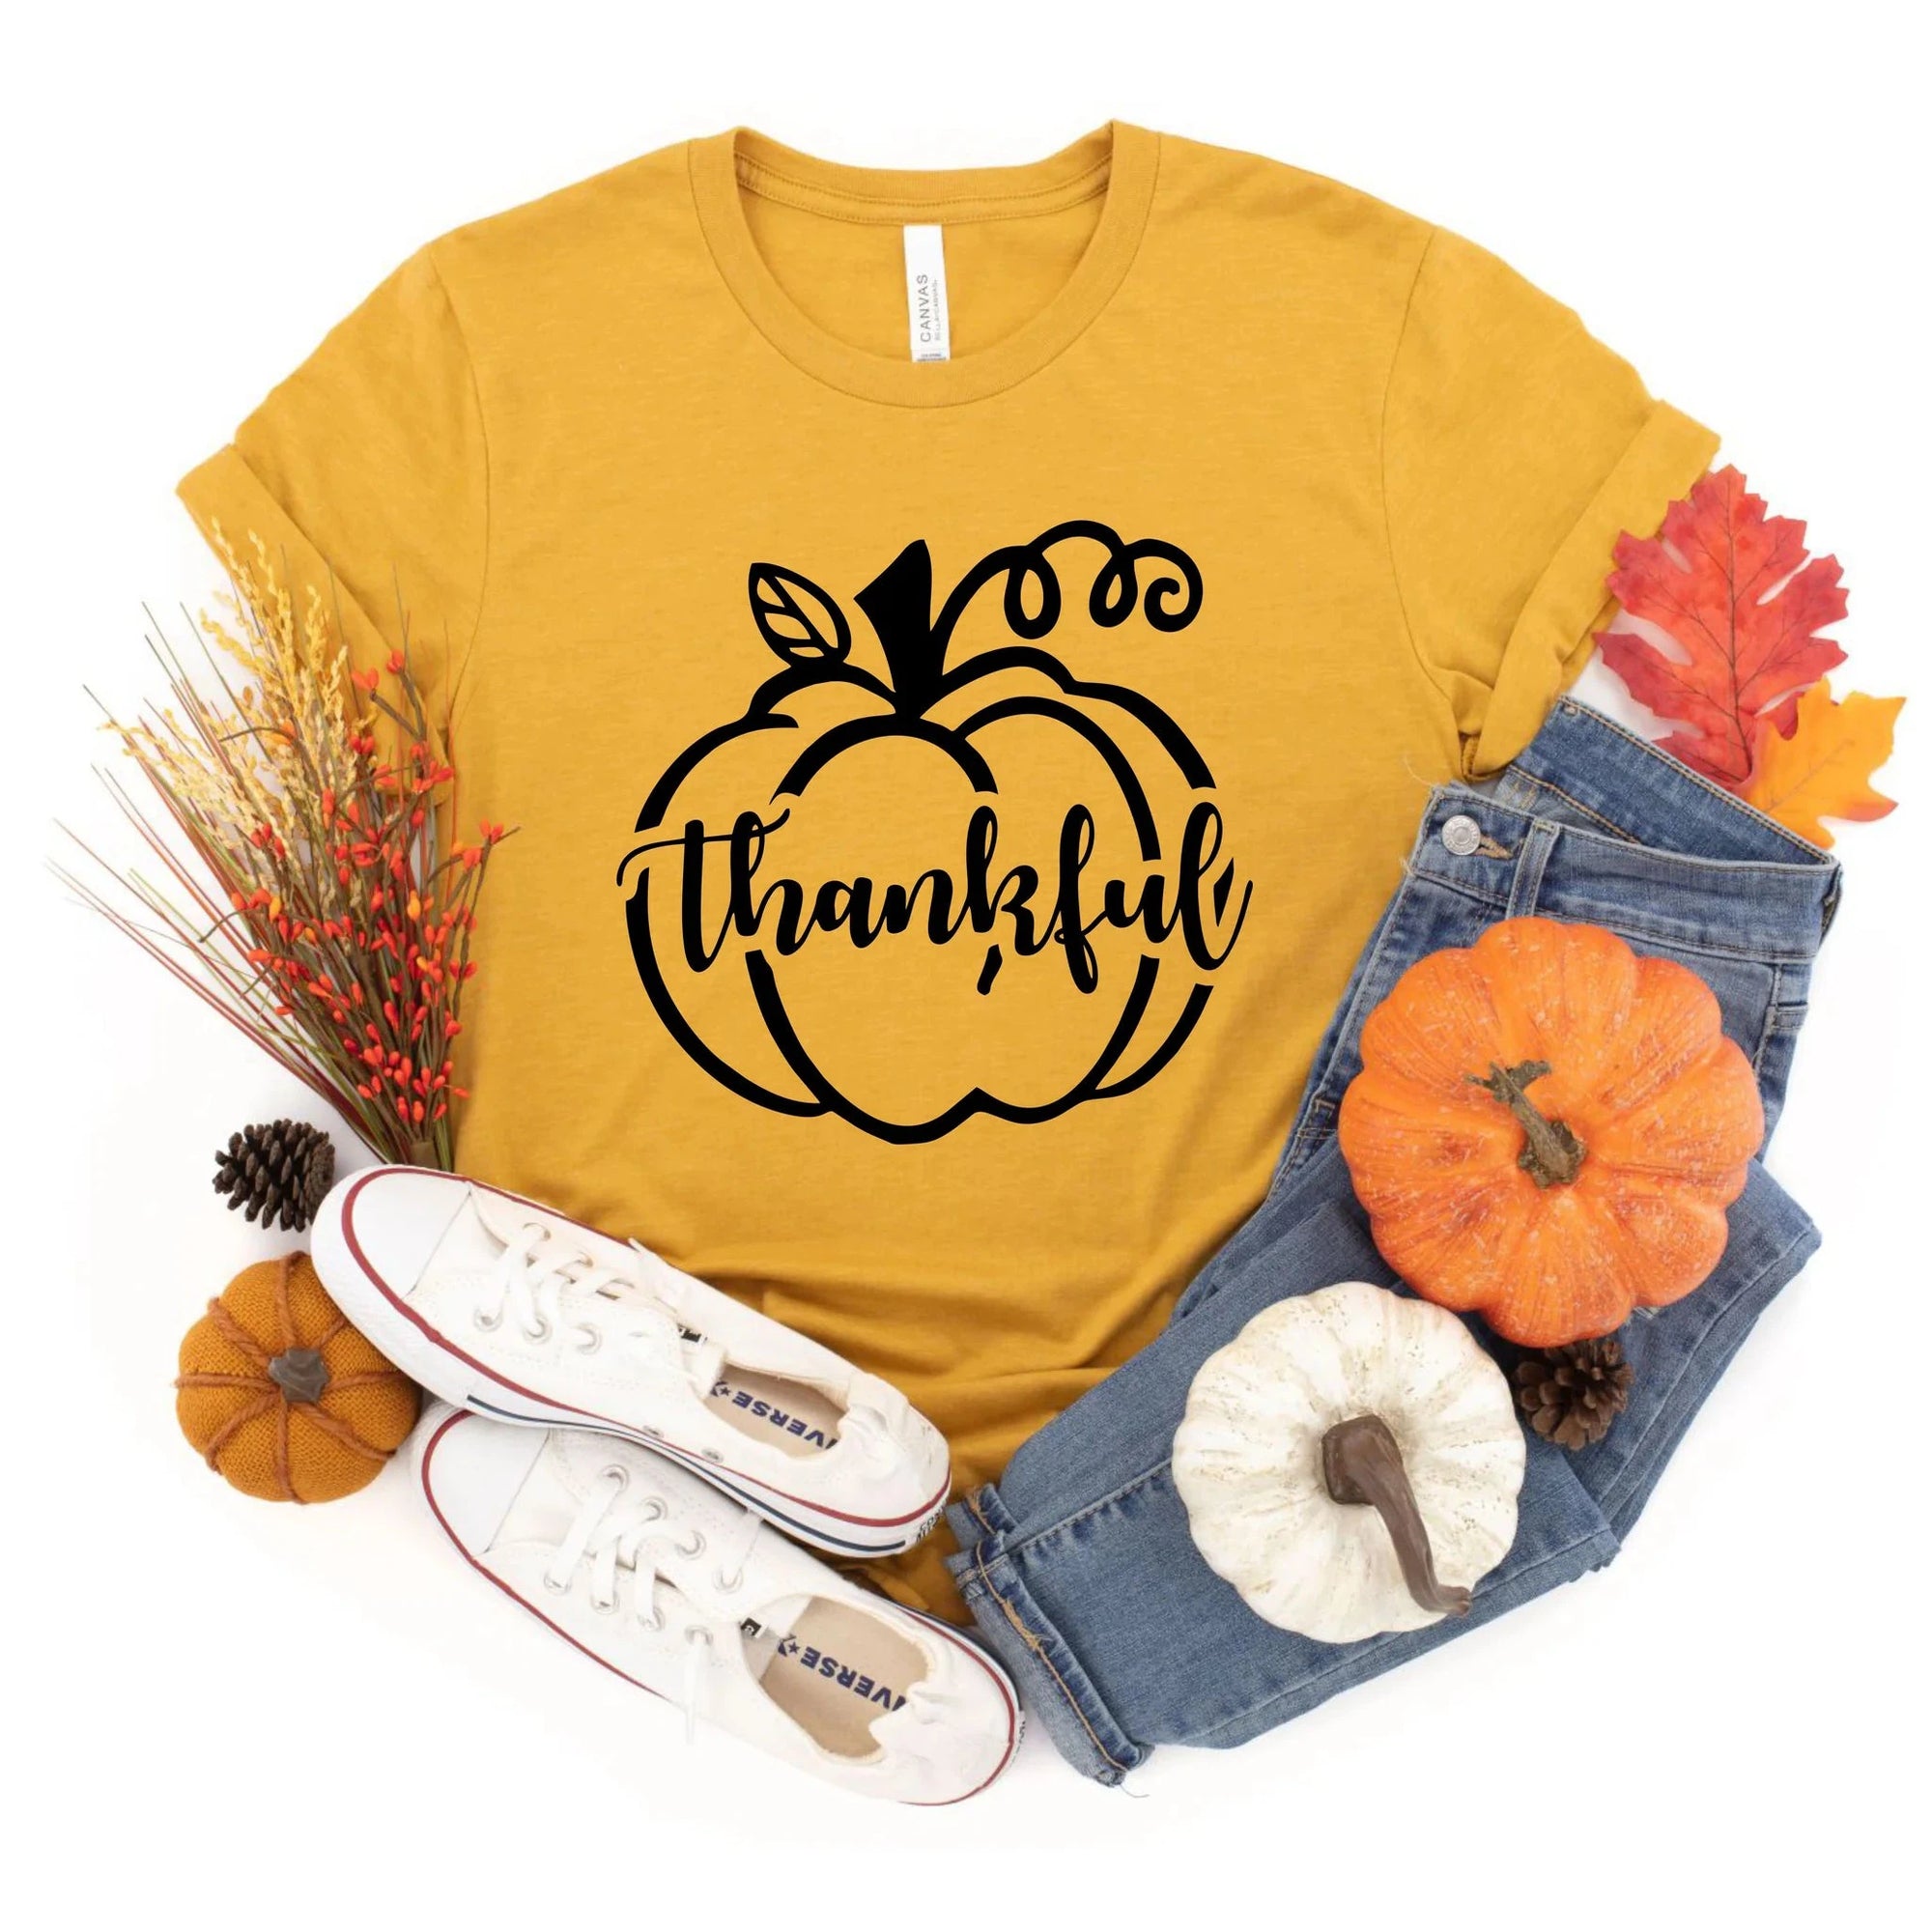 Thankful Pumpkin Graphic Tee with color options